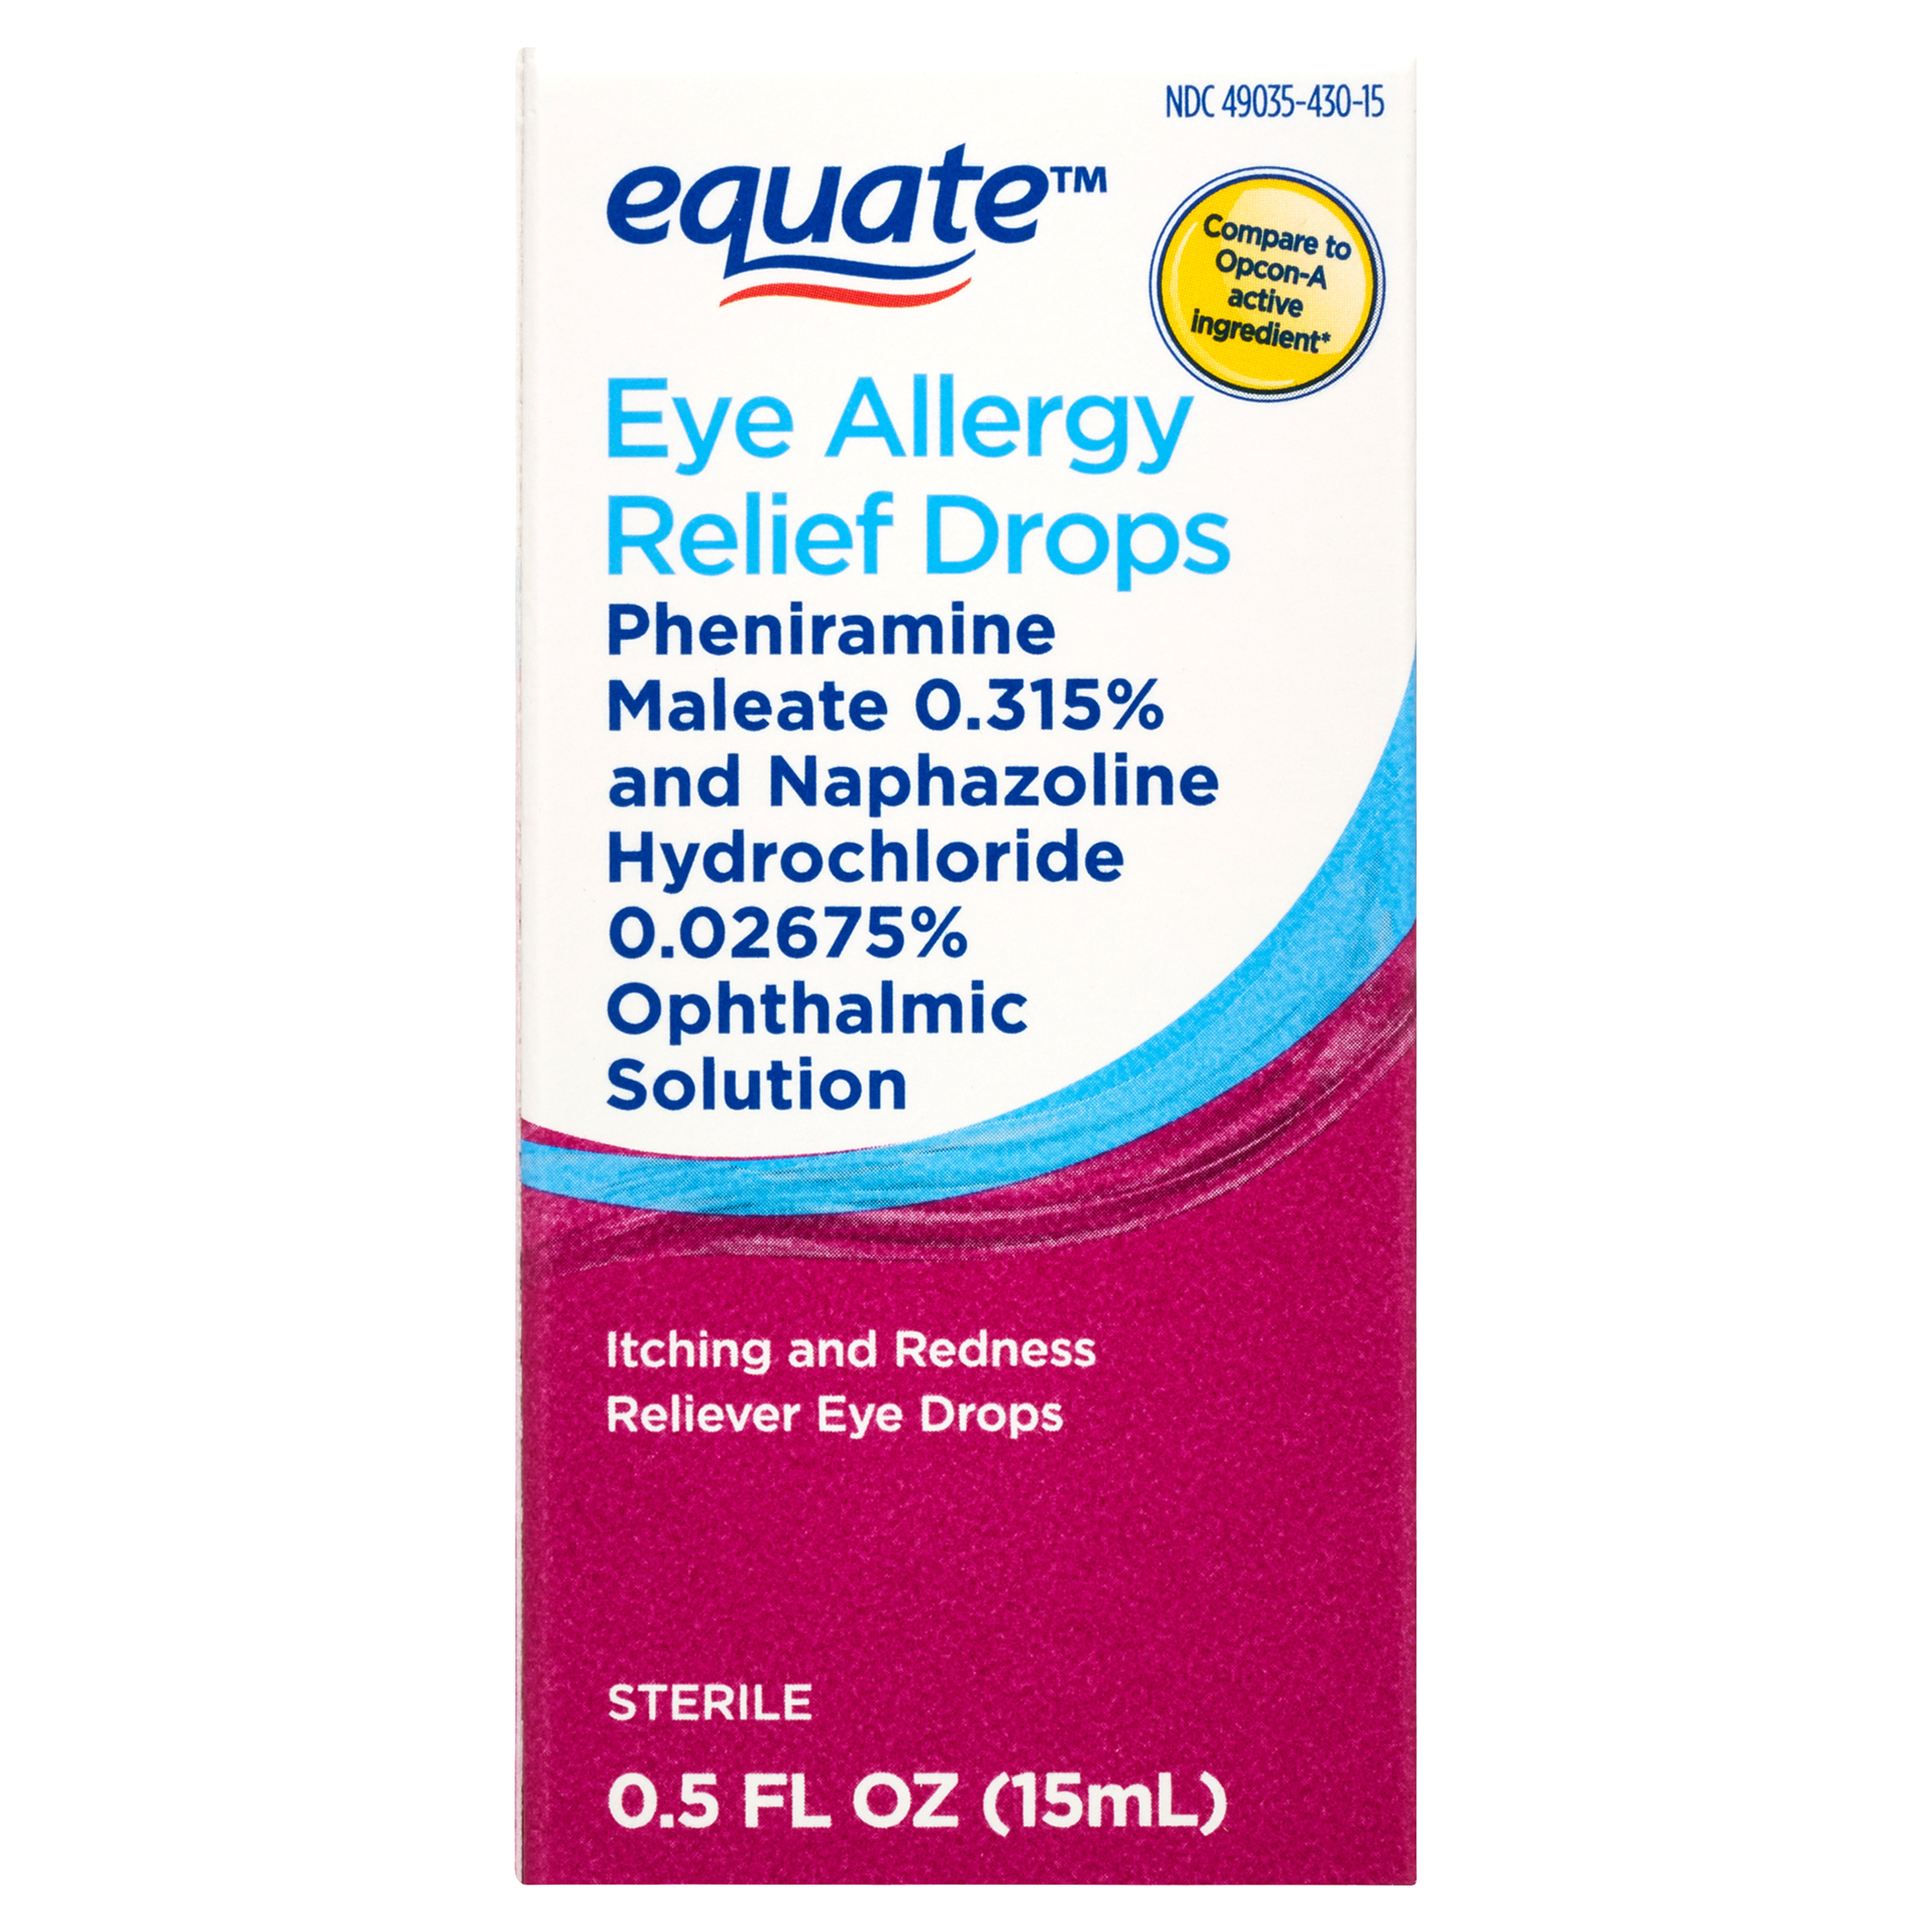 Equate Eye Allergy Relief Antihistamine and Redness Reliever Eye Drops, 0.5 oz - image 1 of 8